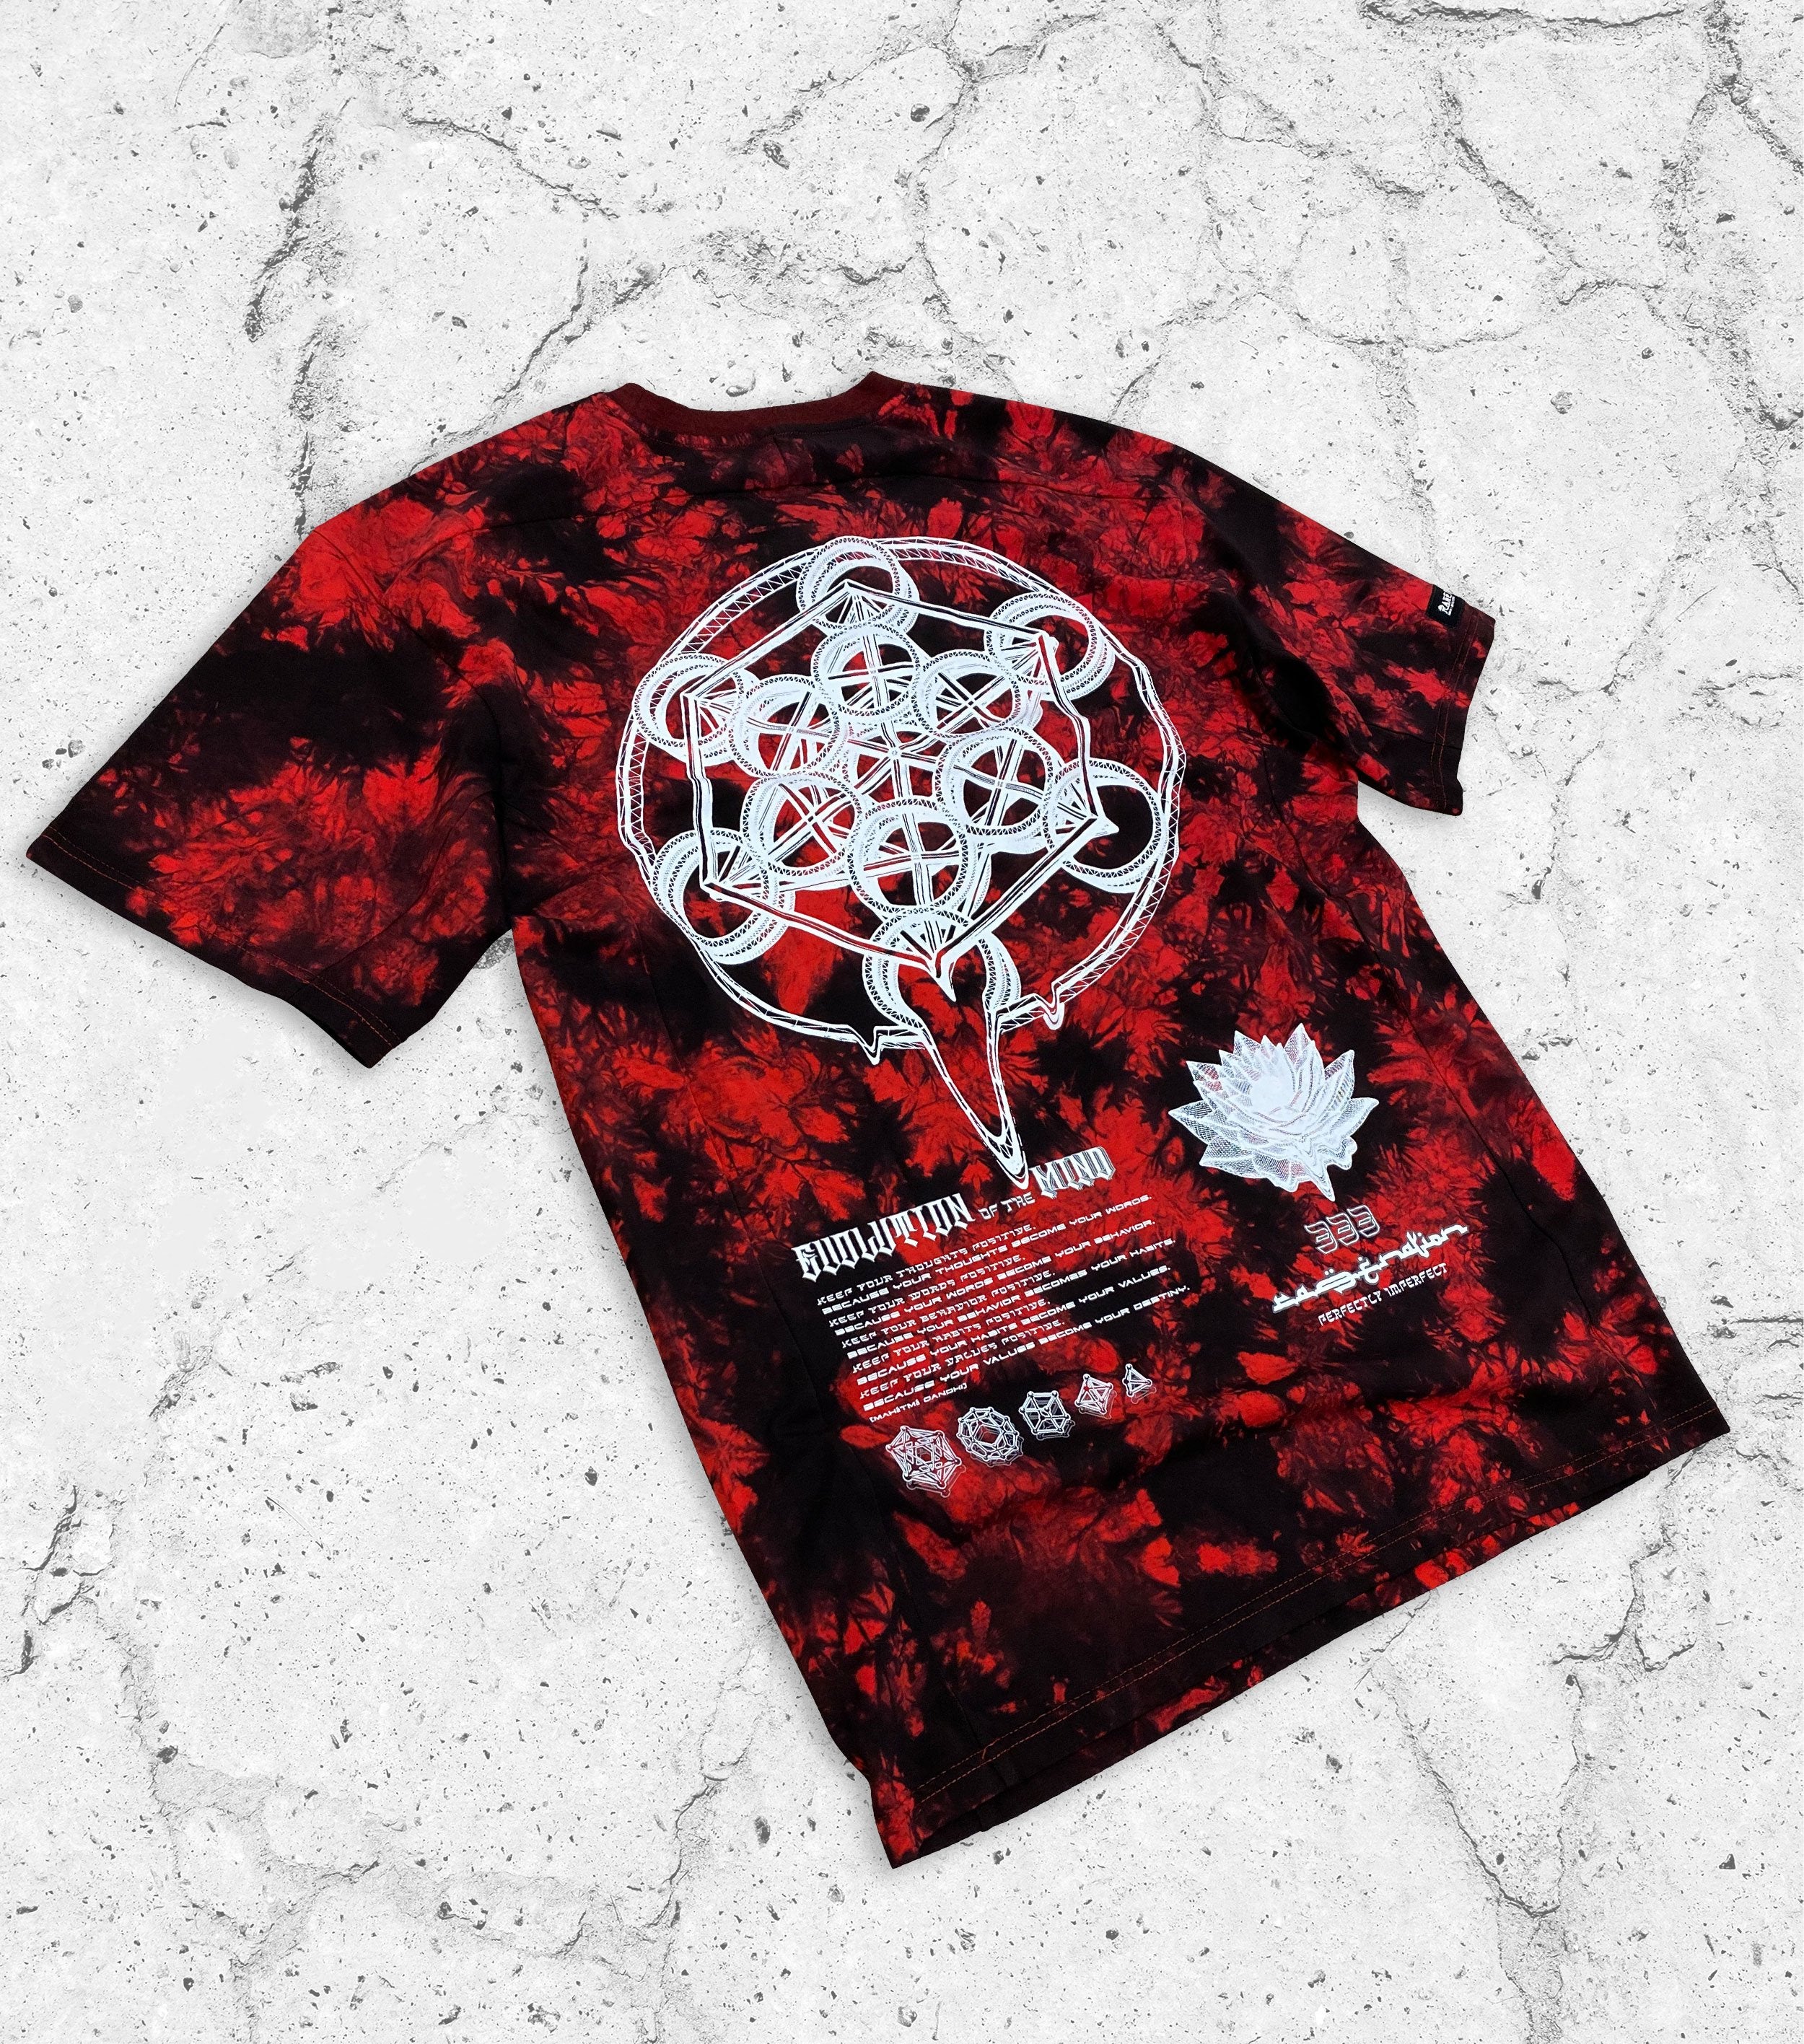 COMING SOON • THINK WISELY V2 • Red Tie-Dye T-Shirt T-Shirt 